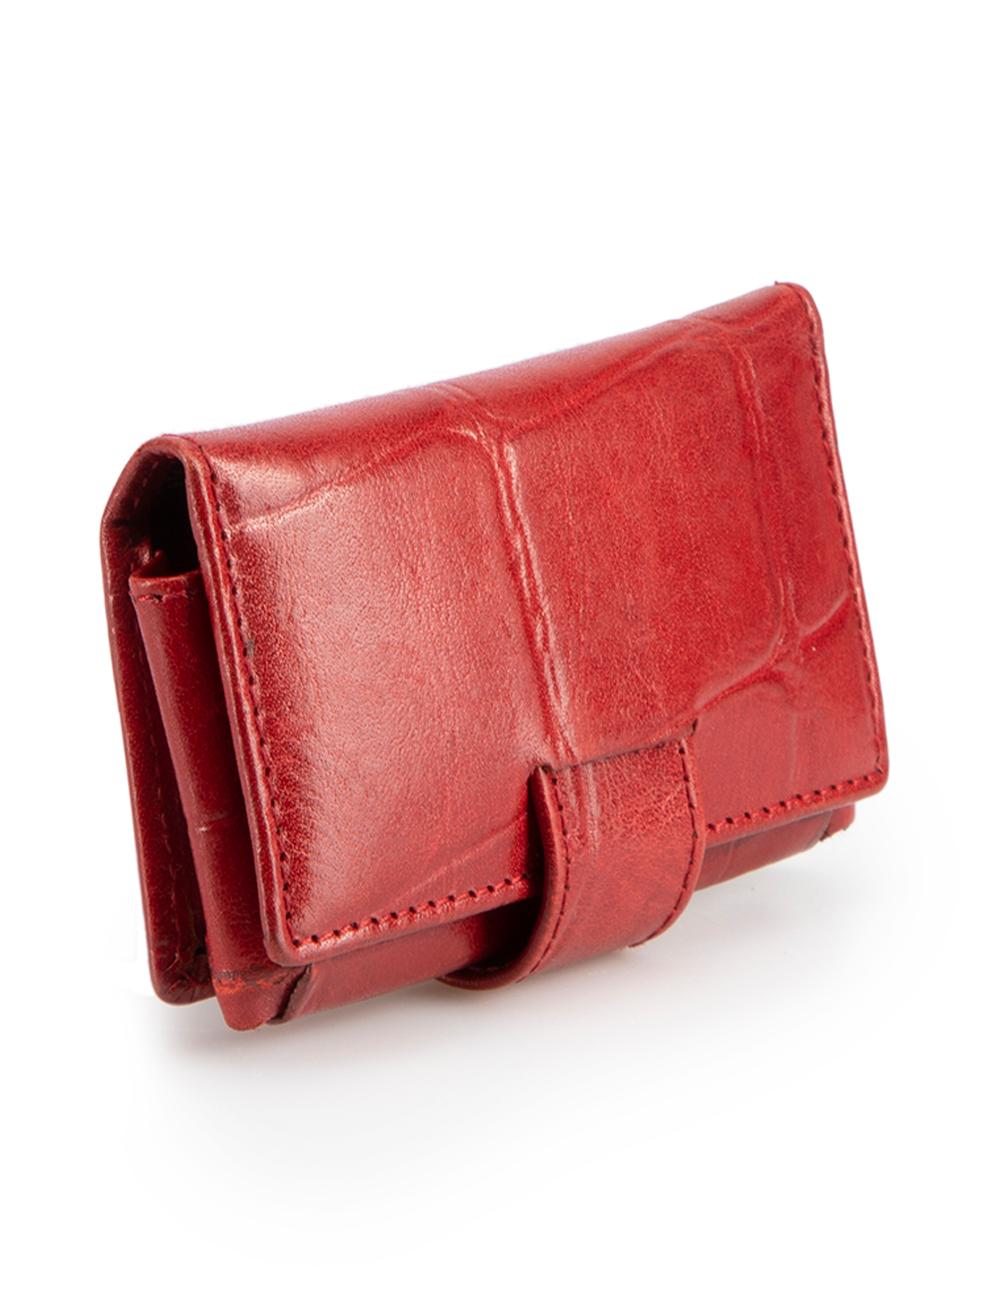 CONDITION is Very good. Minimal wear to case is evident. Minimal wear to the corners with scuff marks and a dark mark to the front on this used Mulberry designer resale item.



Details


Red

Croc embossed leather

Lipstick holder

Snap button